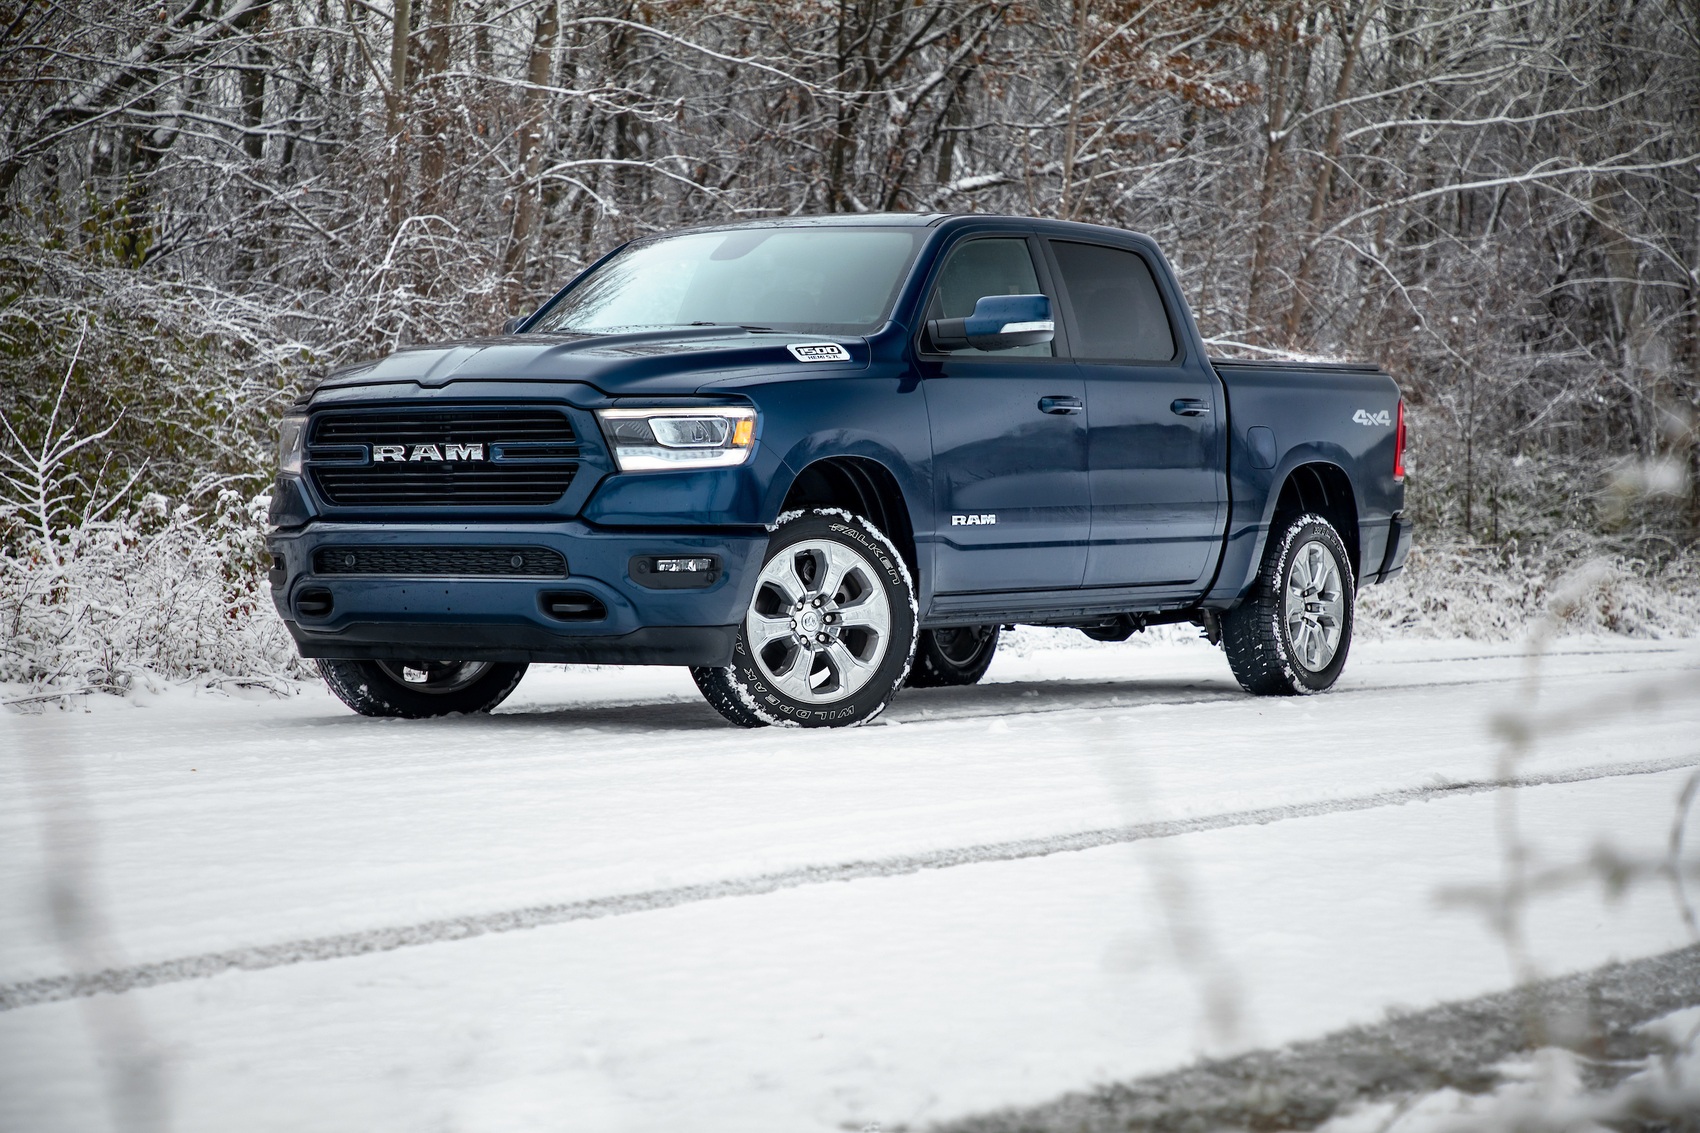 2019 Ram 1500 North front mid-clearance